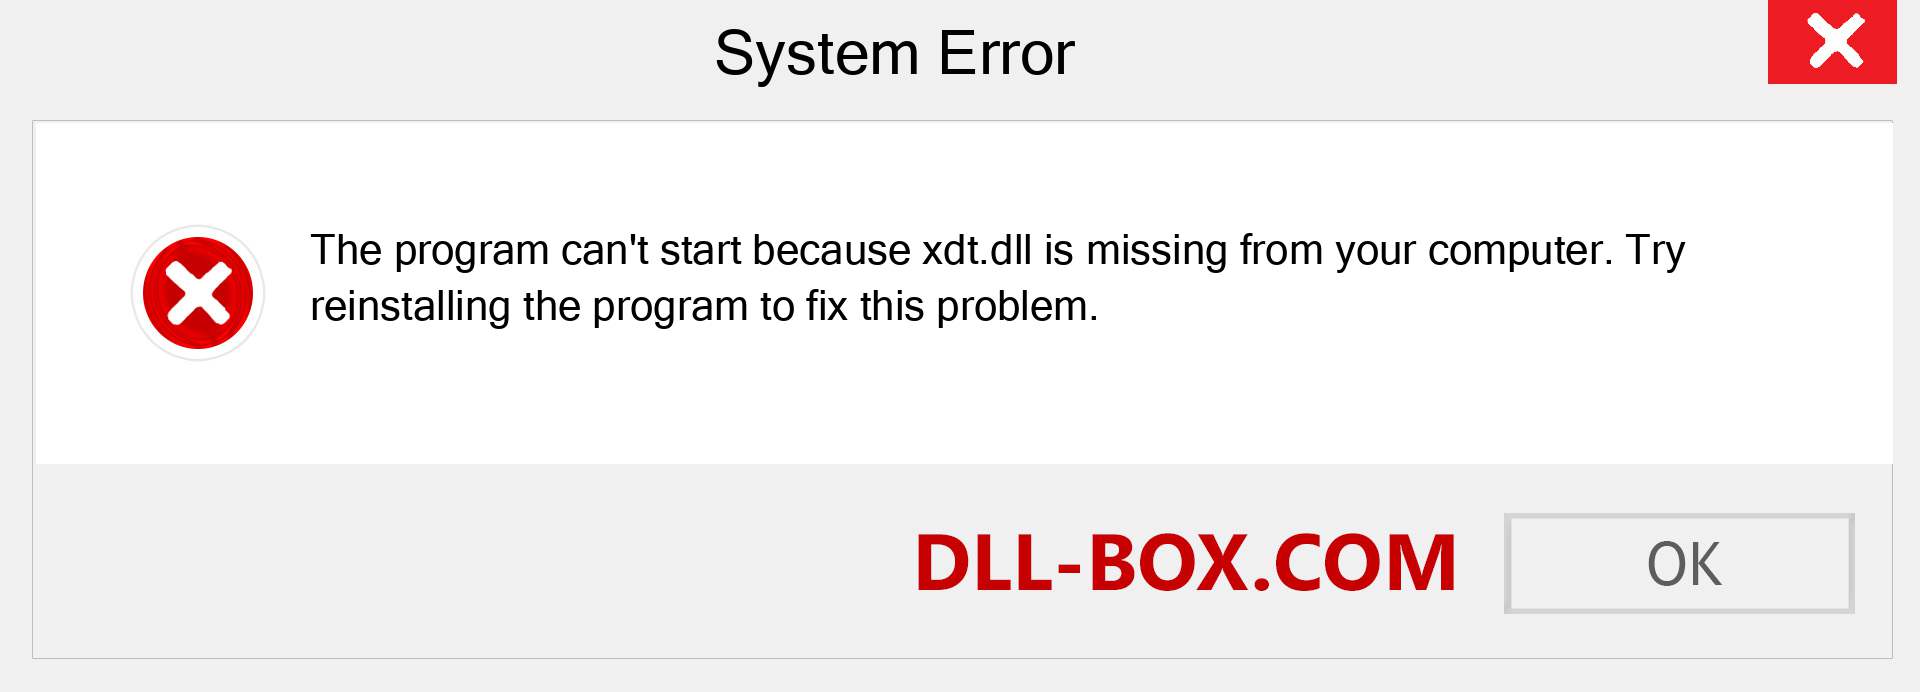  xdt.dll file is missing?. Download for Windows 7, 8, 10 - Fix  xdt dll Missing Error on Windows, photos, images